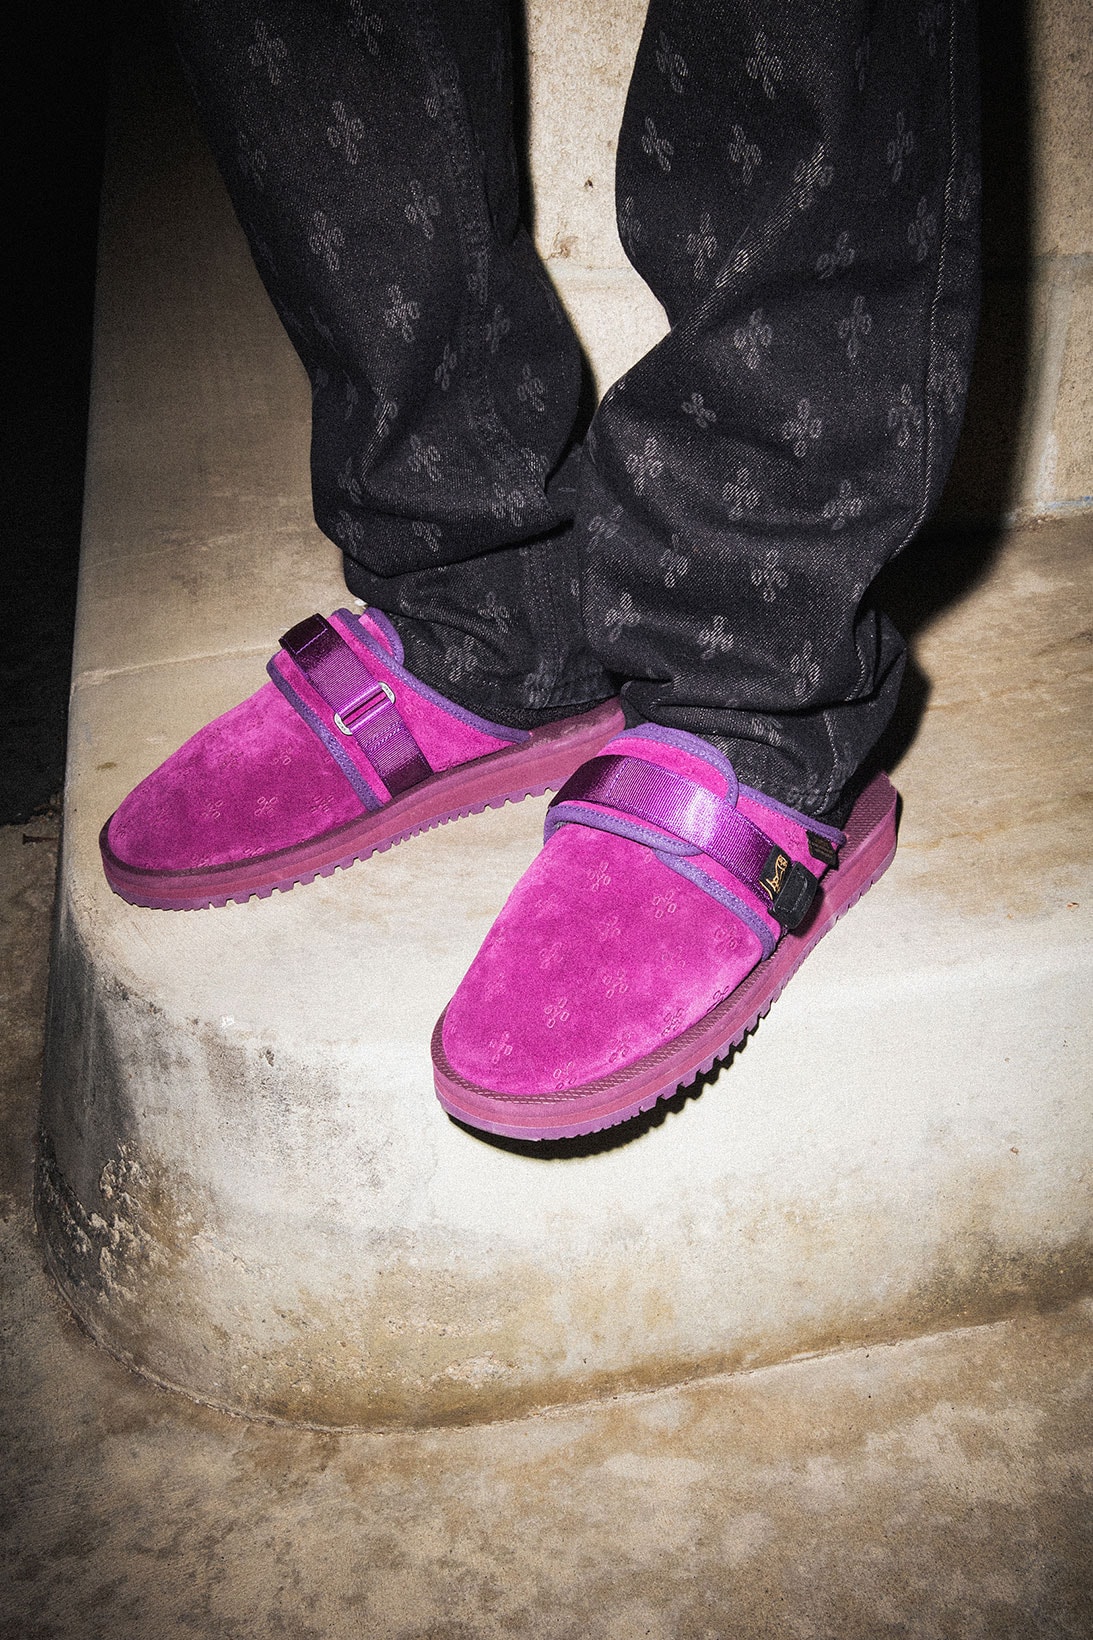 Drake OVO October's Very Own Suicoke Collaboration ZAVO-M2AB Sandals